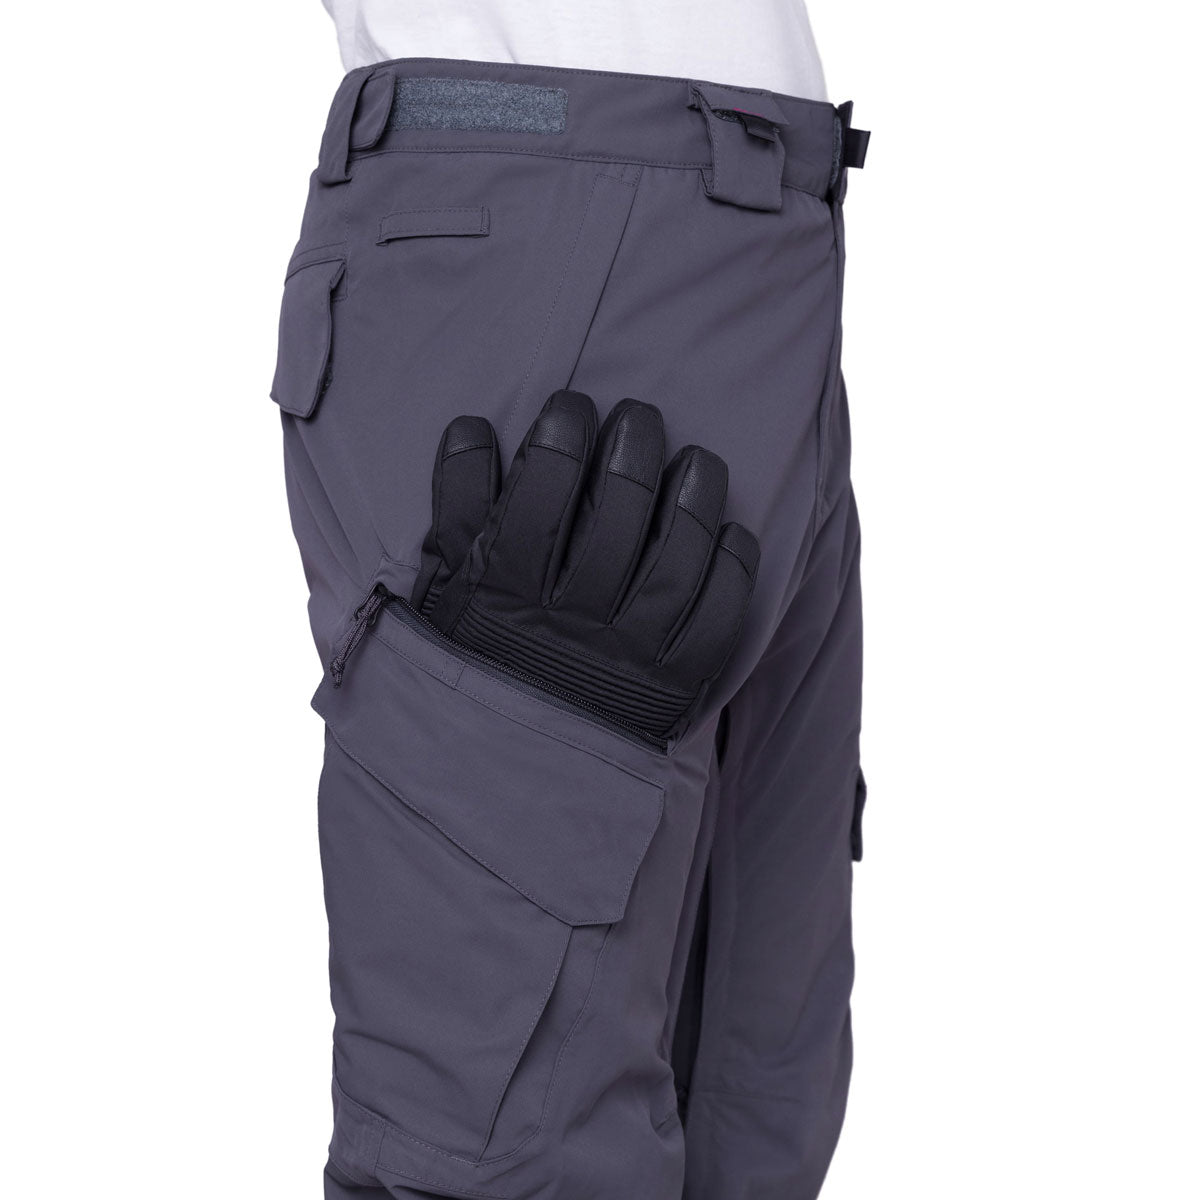 686 Men's Smarty 3-In-1 Cargo Snowboard Pants - Charcoal image 4